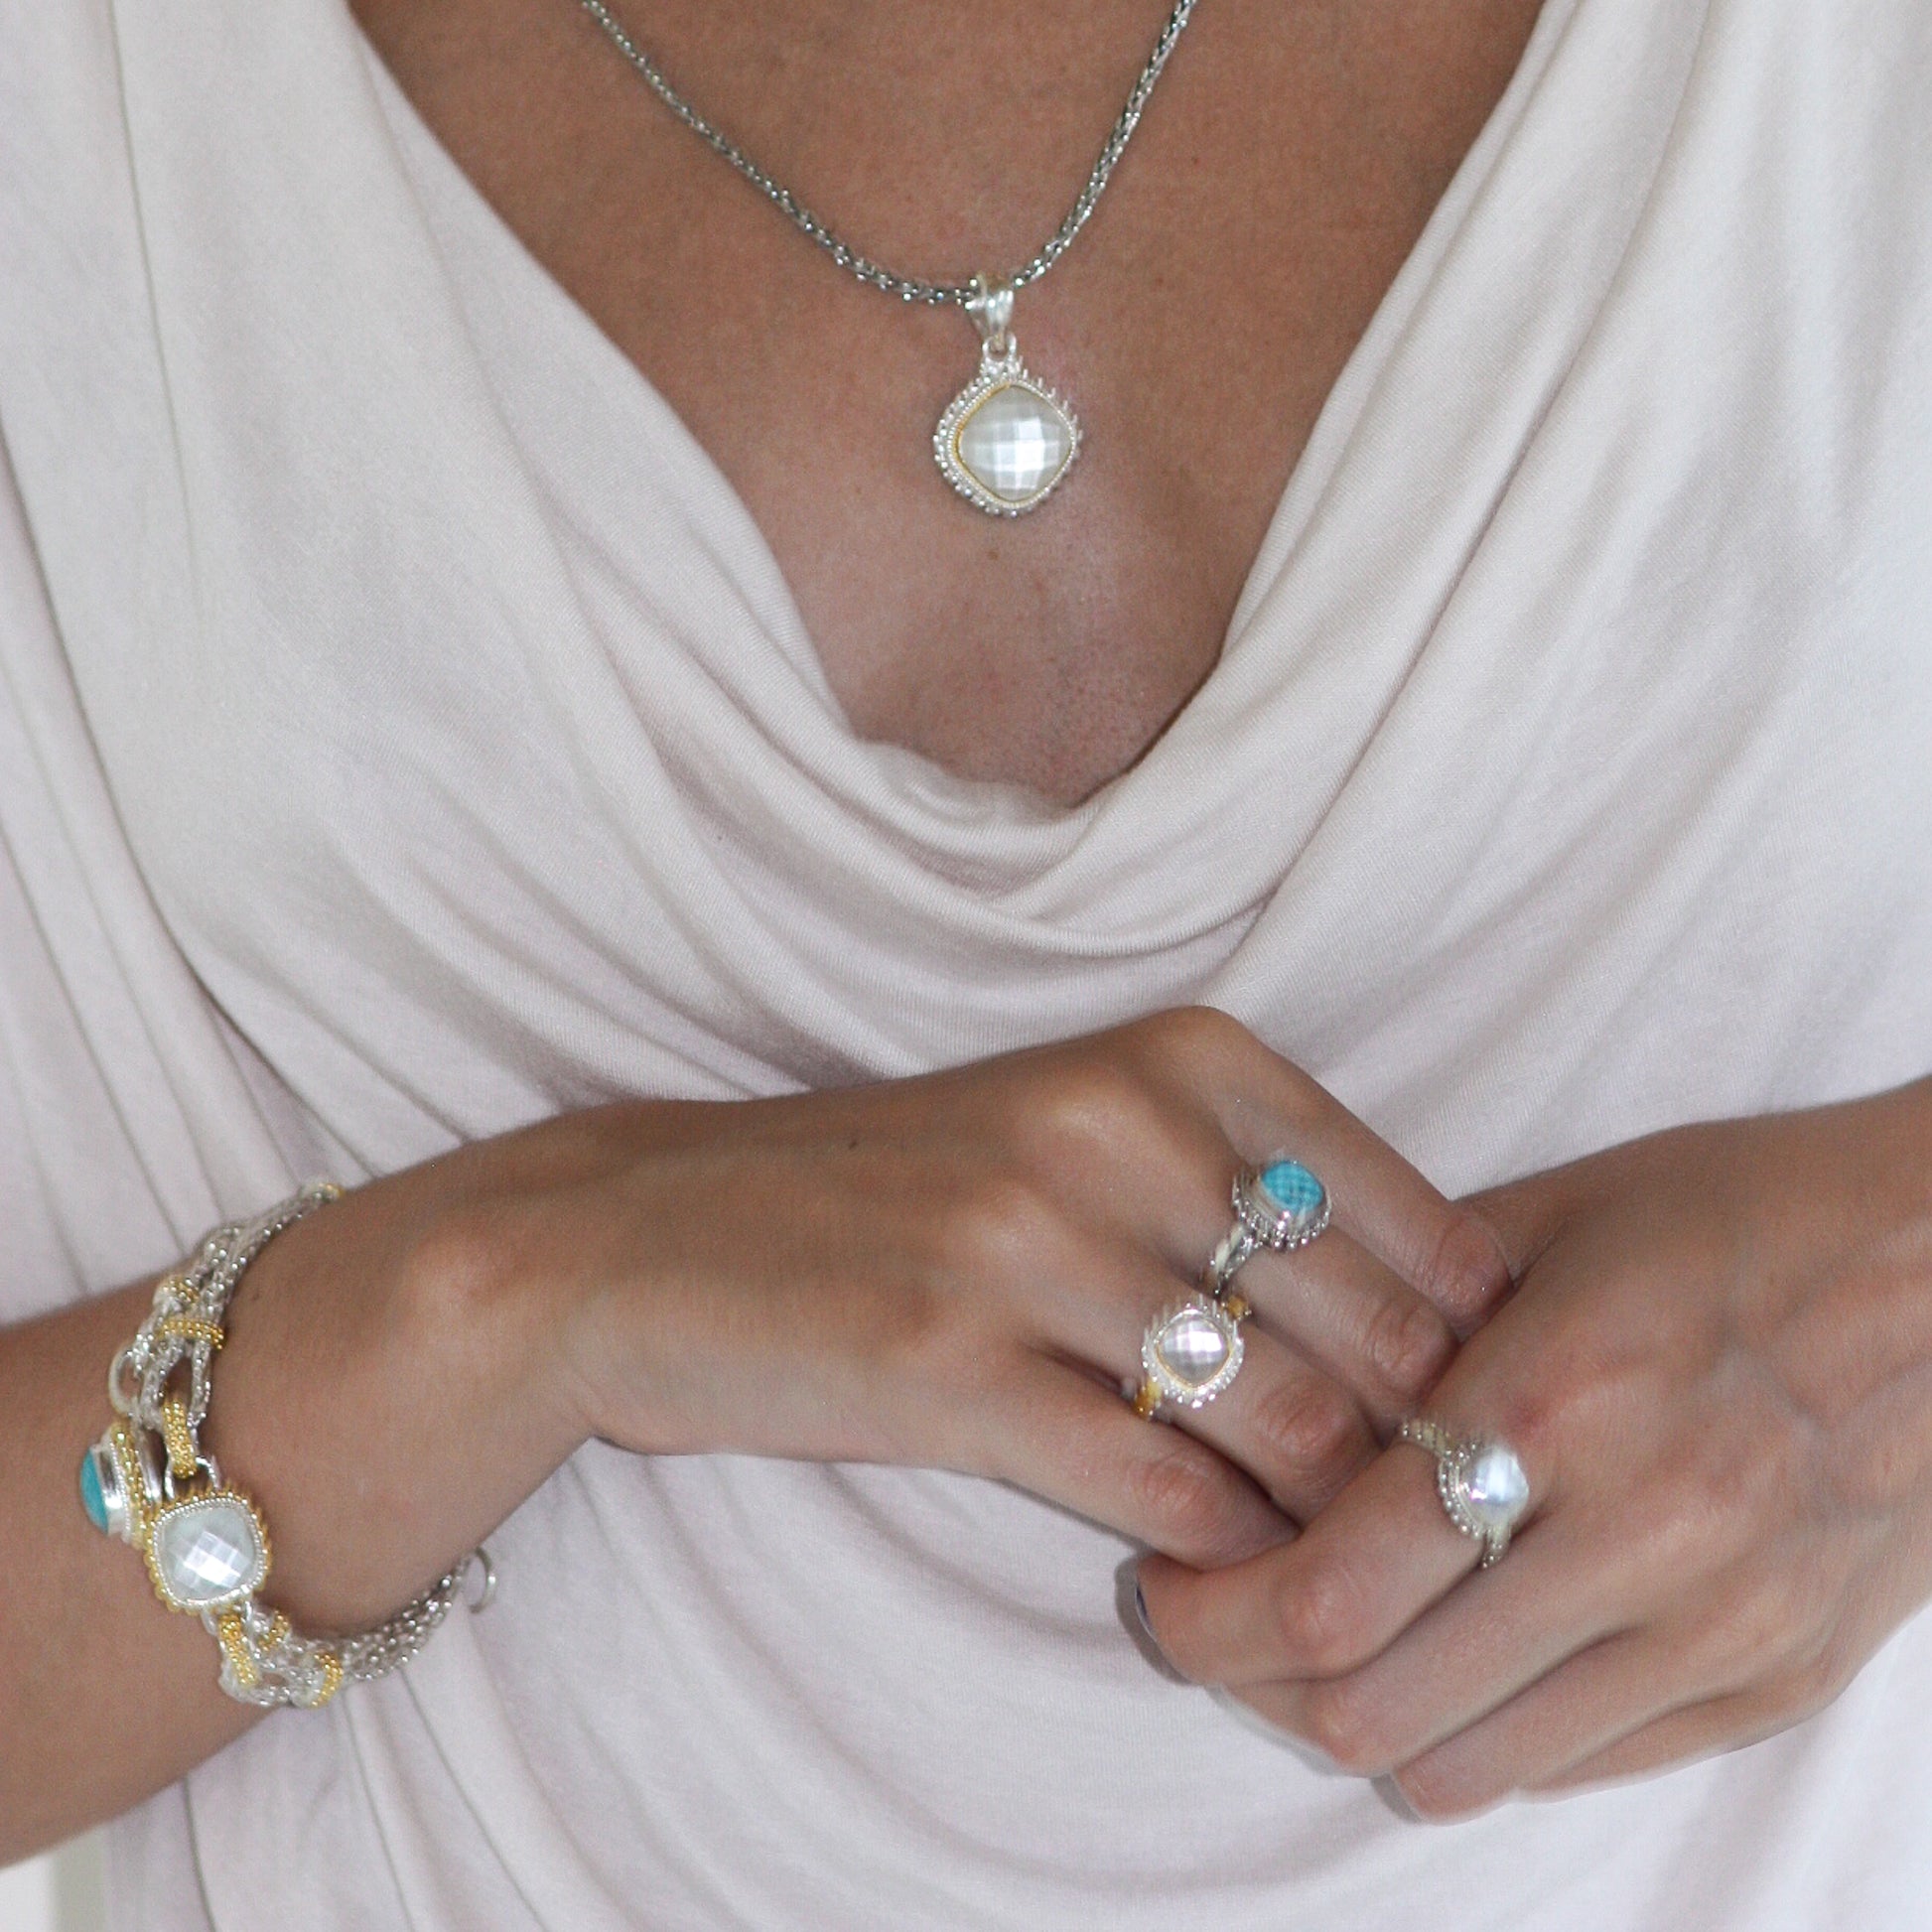 Woman wearing a silver and gold turquoise doublet bracelet and ring.